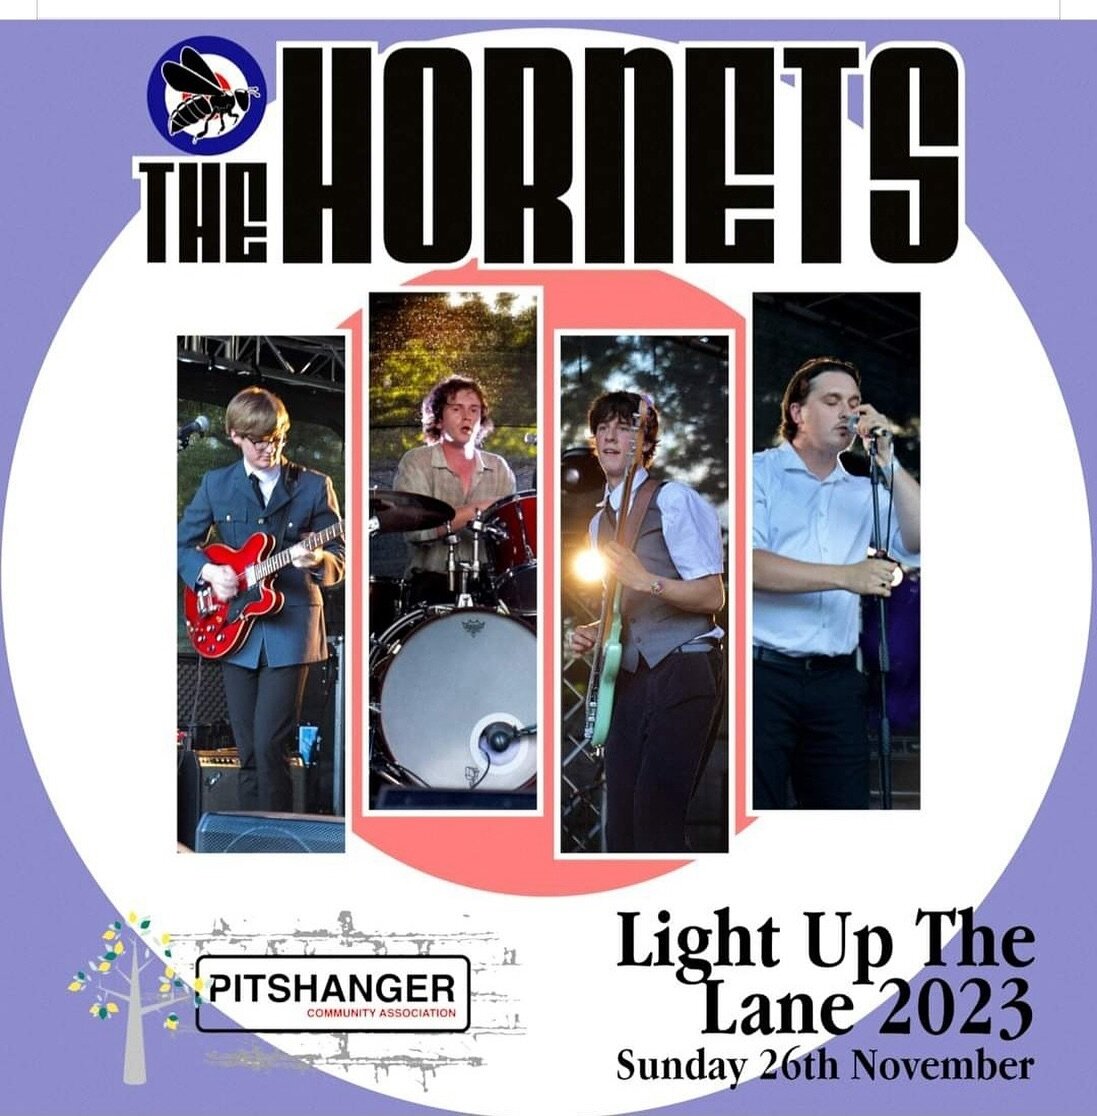 @the.hornets_ will be on the Acoustic stage at Light Up the Lane today at 5.30pm

#livemusic #communityevent #pitshangerlane #pitshanger #ealing #christmasevent